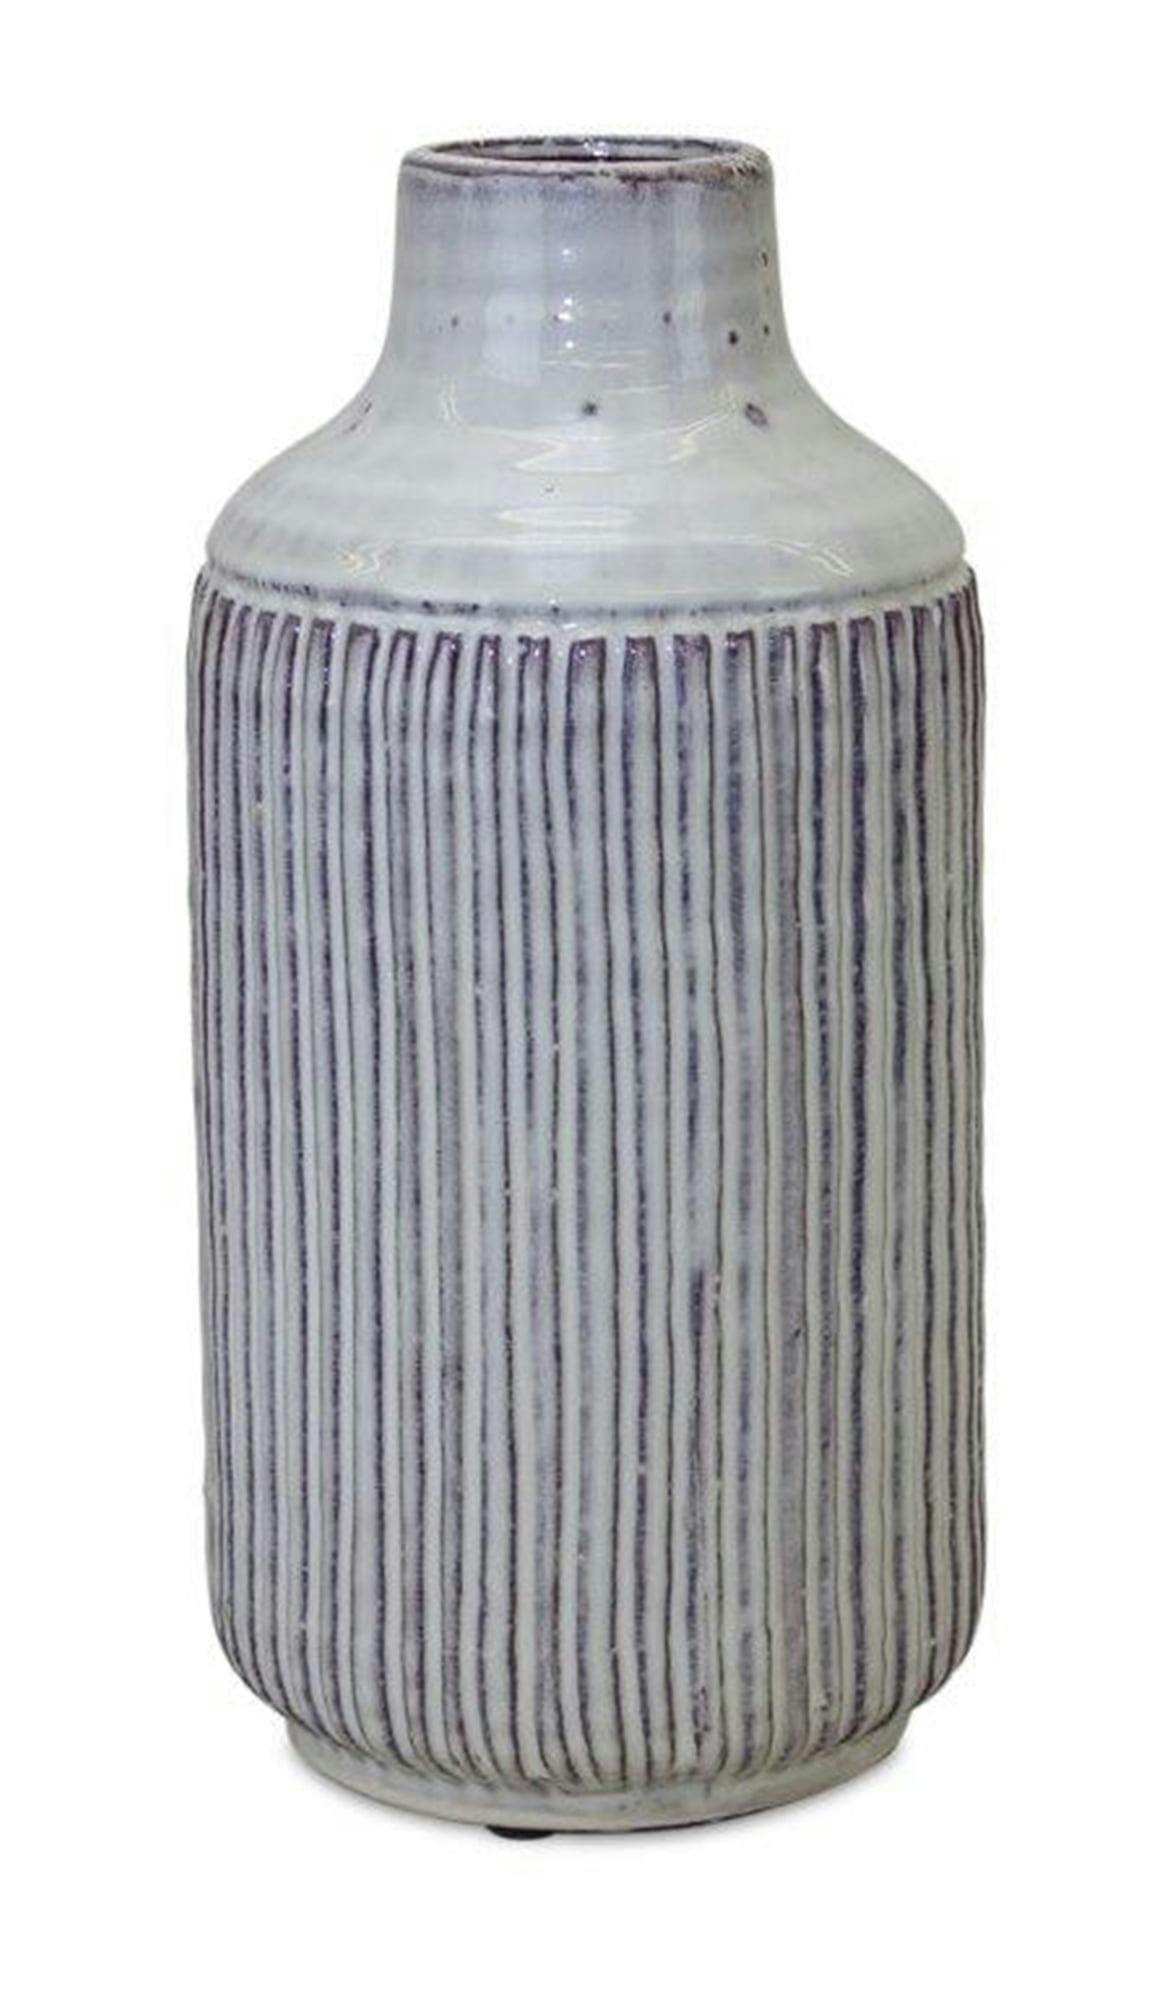 Rustic Glazed Ceramic Vase with Ribbed Texture - Brown and White